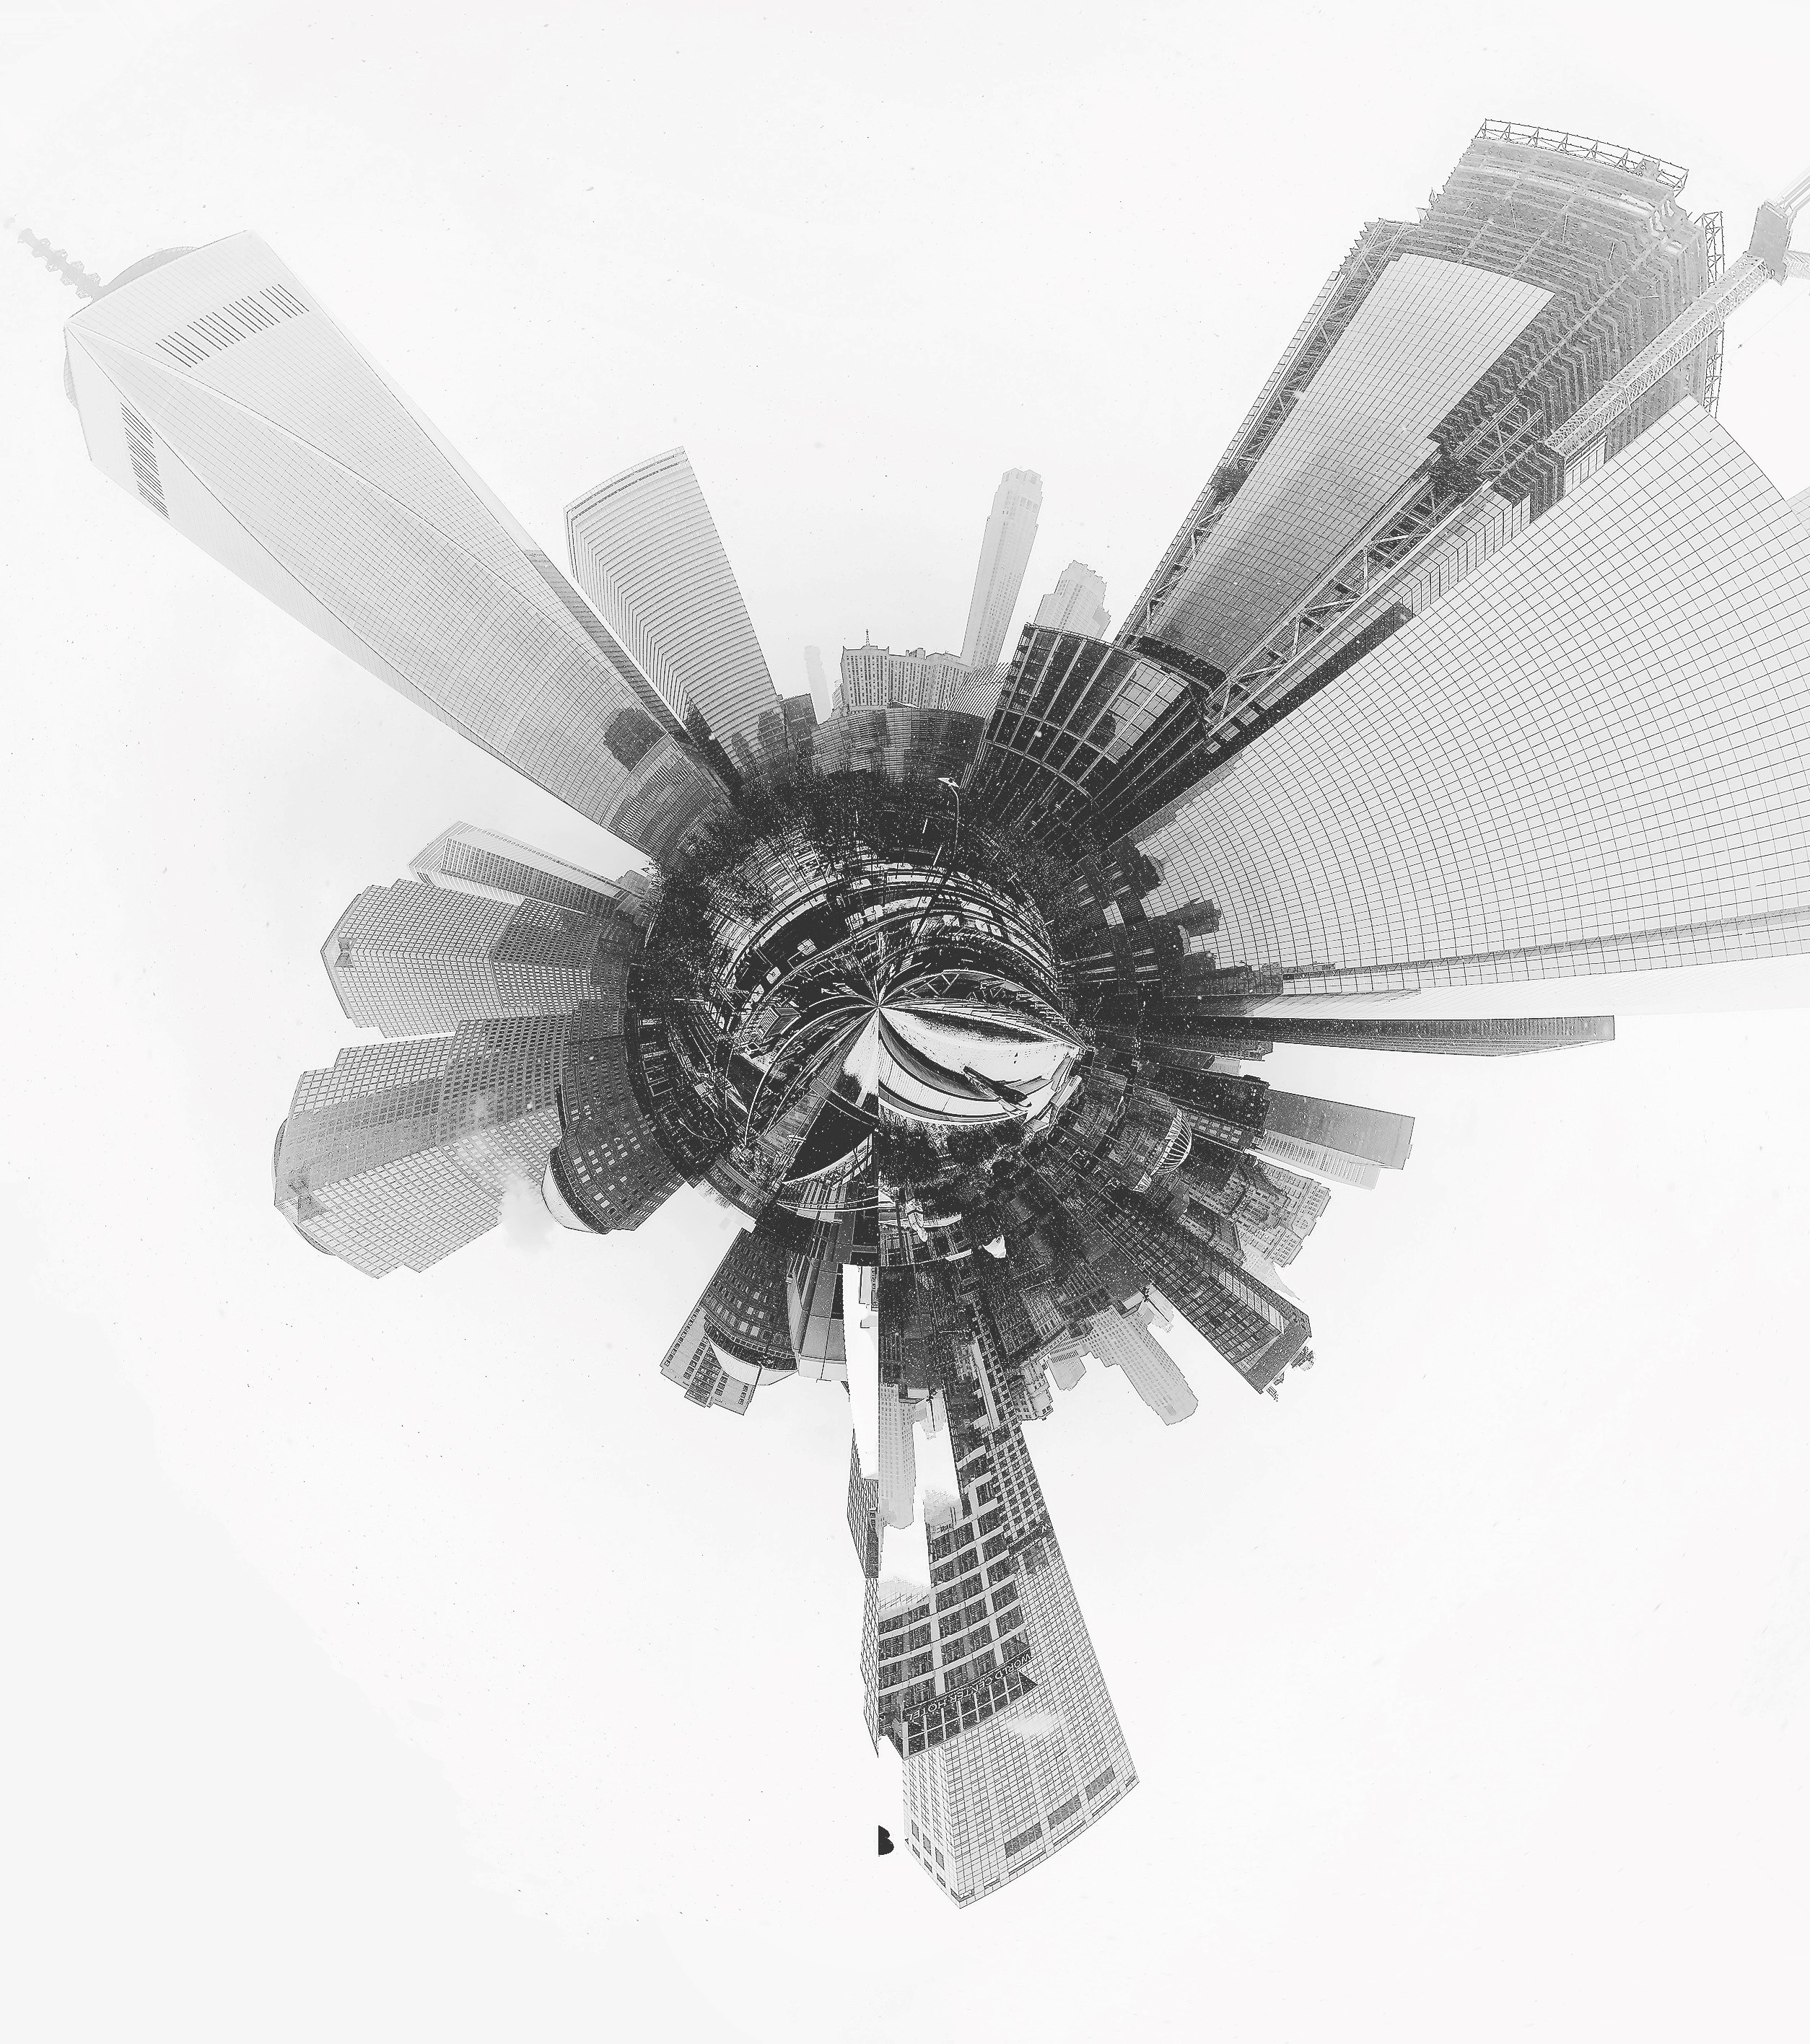  A black and white photograph of the World Trade Center site made up of more than 50 still images shows the Memorial, One World Trade Center, and other buildings emerging from a central, circular point. This creates a “tiny planet” photo effect that makes it appear the World Trade Center site is rising out of a small planet.